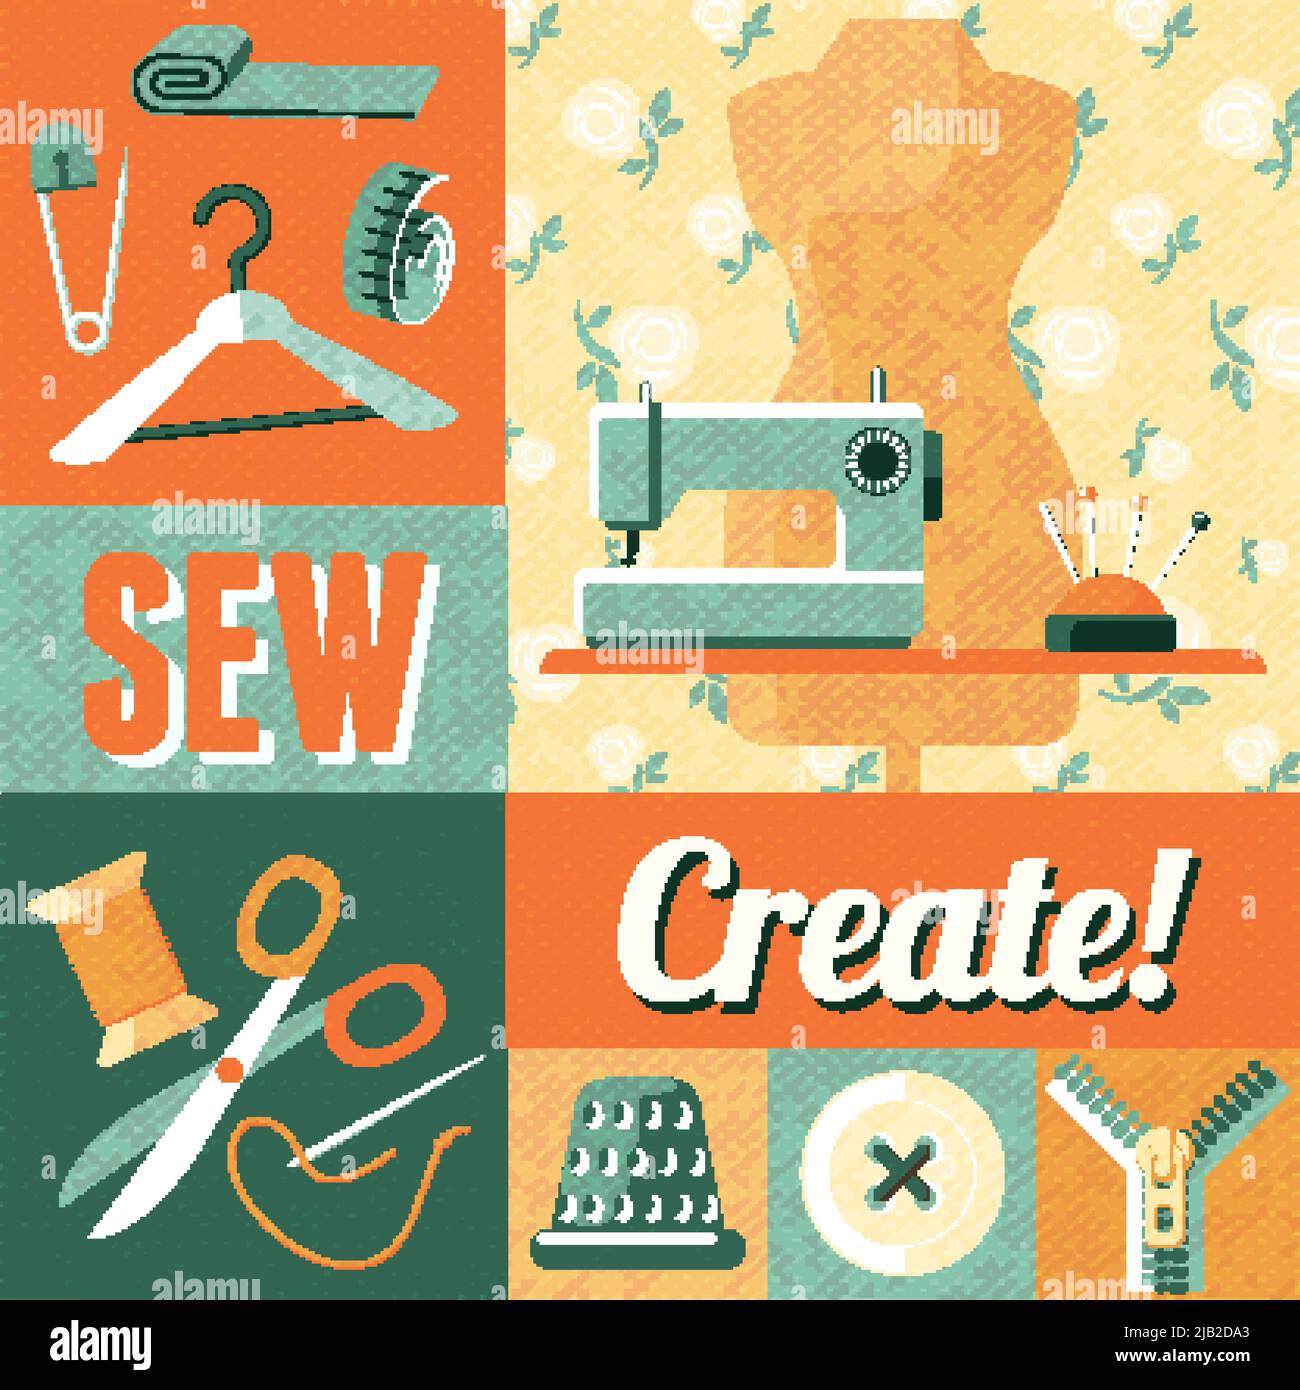 Dressmaker Kit of Dress Form, Sewing Machine and T Poster for